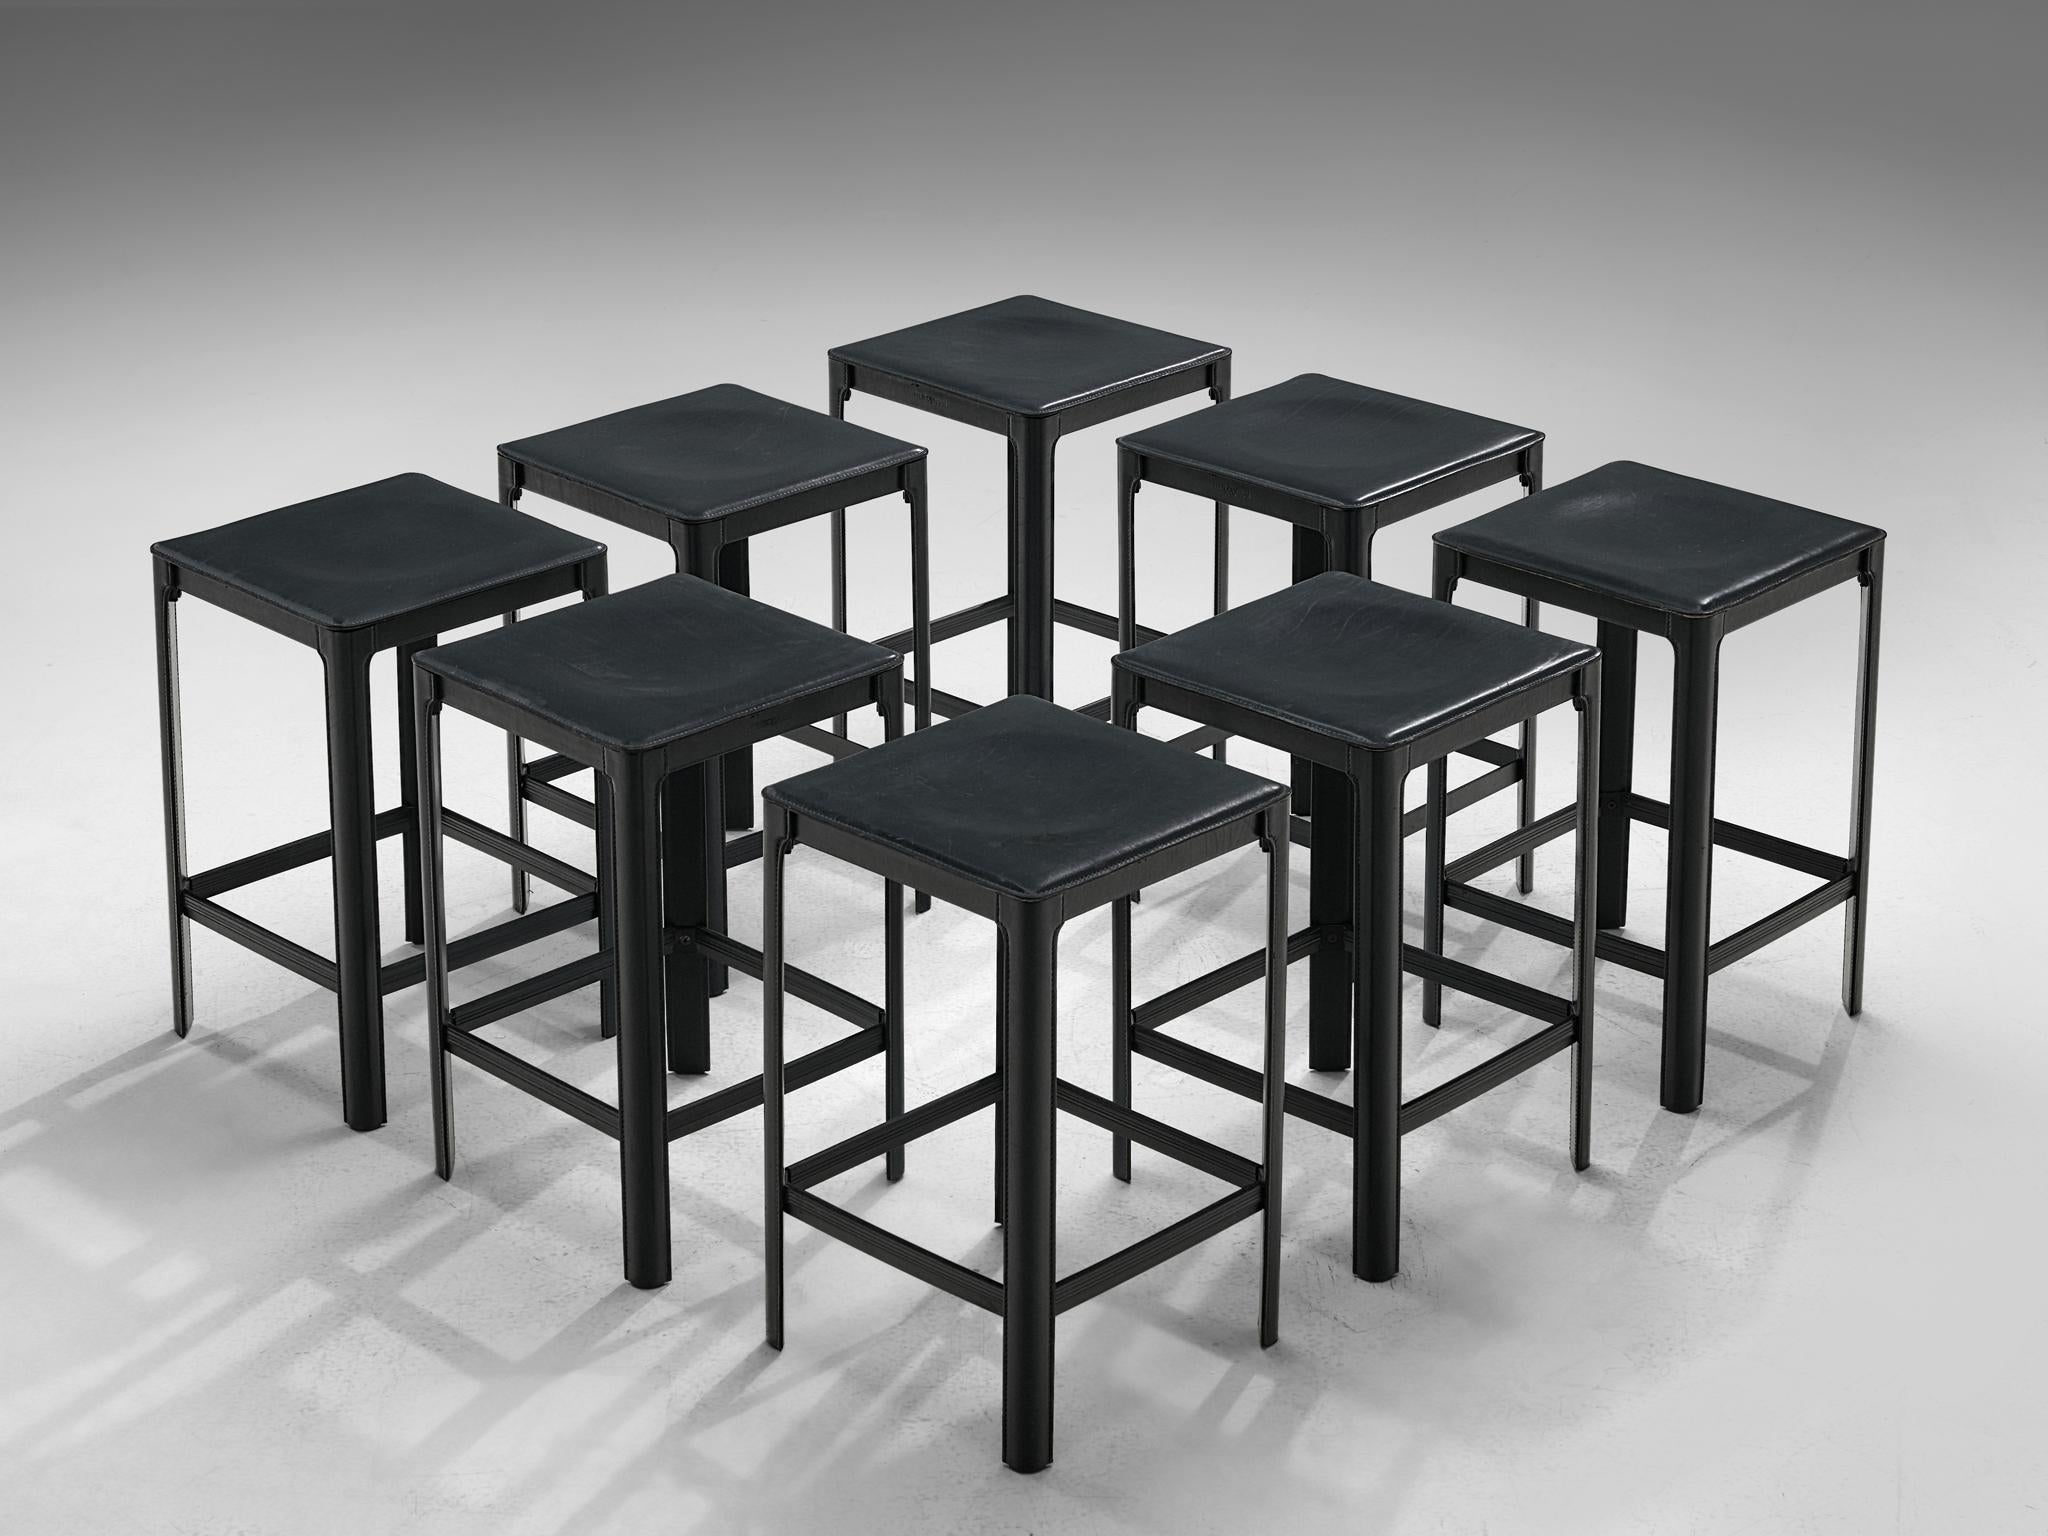 Matteograssi, bar stools, leather, metal, Italy, 1970s

Postmodern set of stools in black leather, designed by Matteo Grassi. The stools are completely covered in leather, which is stitched and molded on to the metal frame, a type of architectural